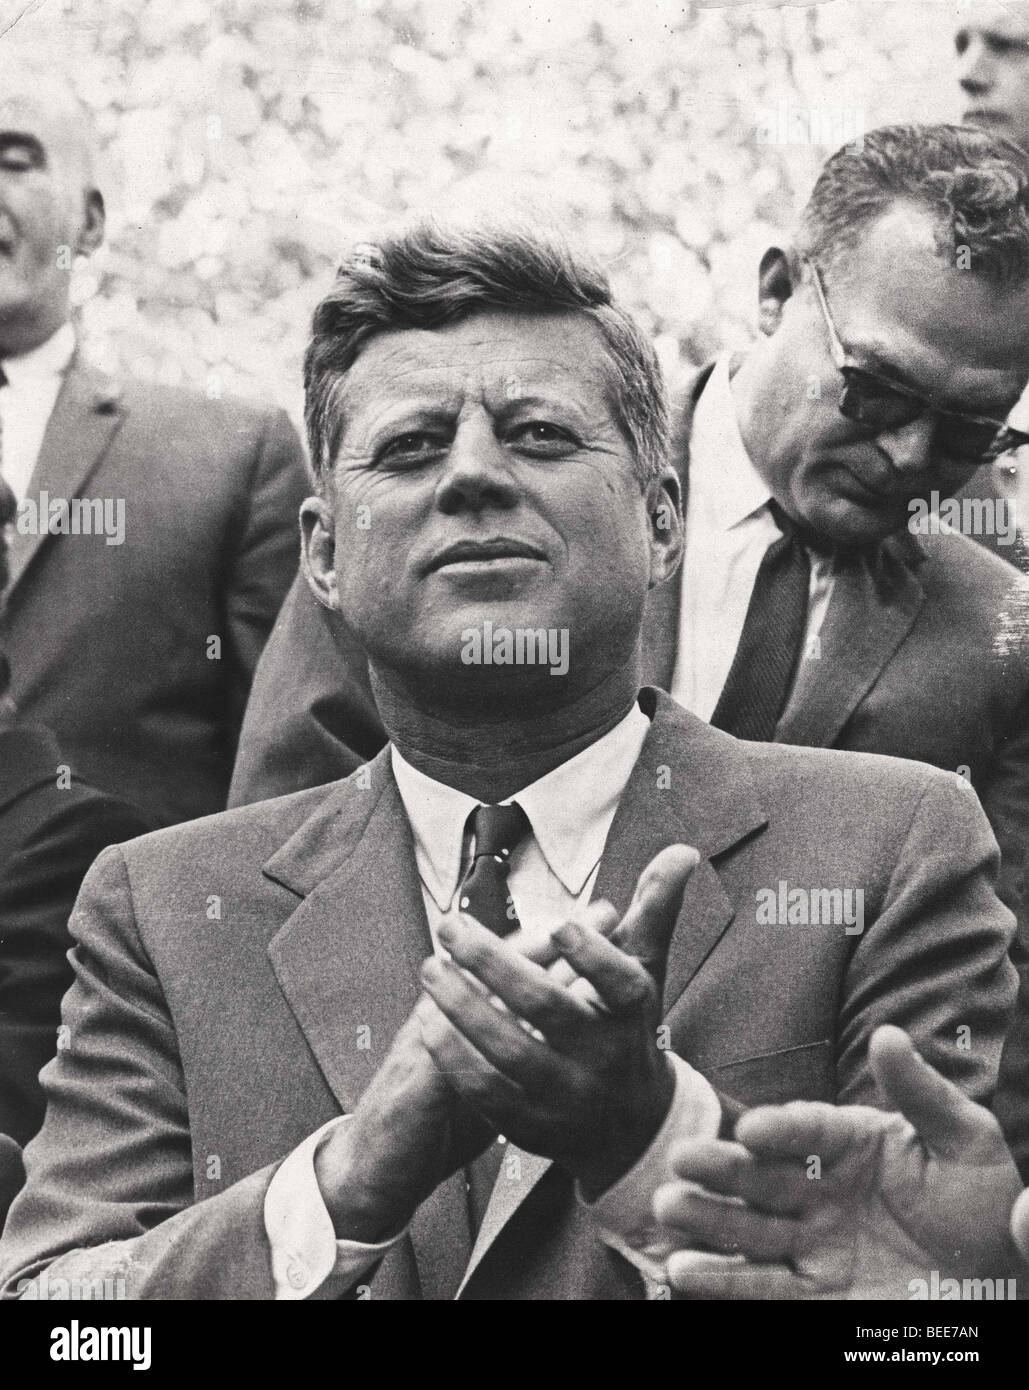 Oct 12, 1960; New York, NY, USA; President JOHN F. KENNEDY and FORTUNE POPE during a Columbus Day Parade. (Credit Image: © Stock Photo